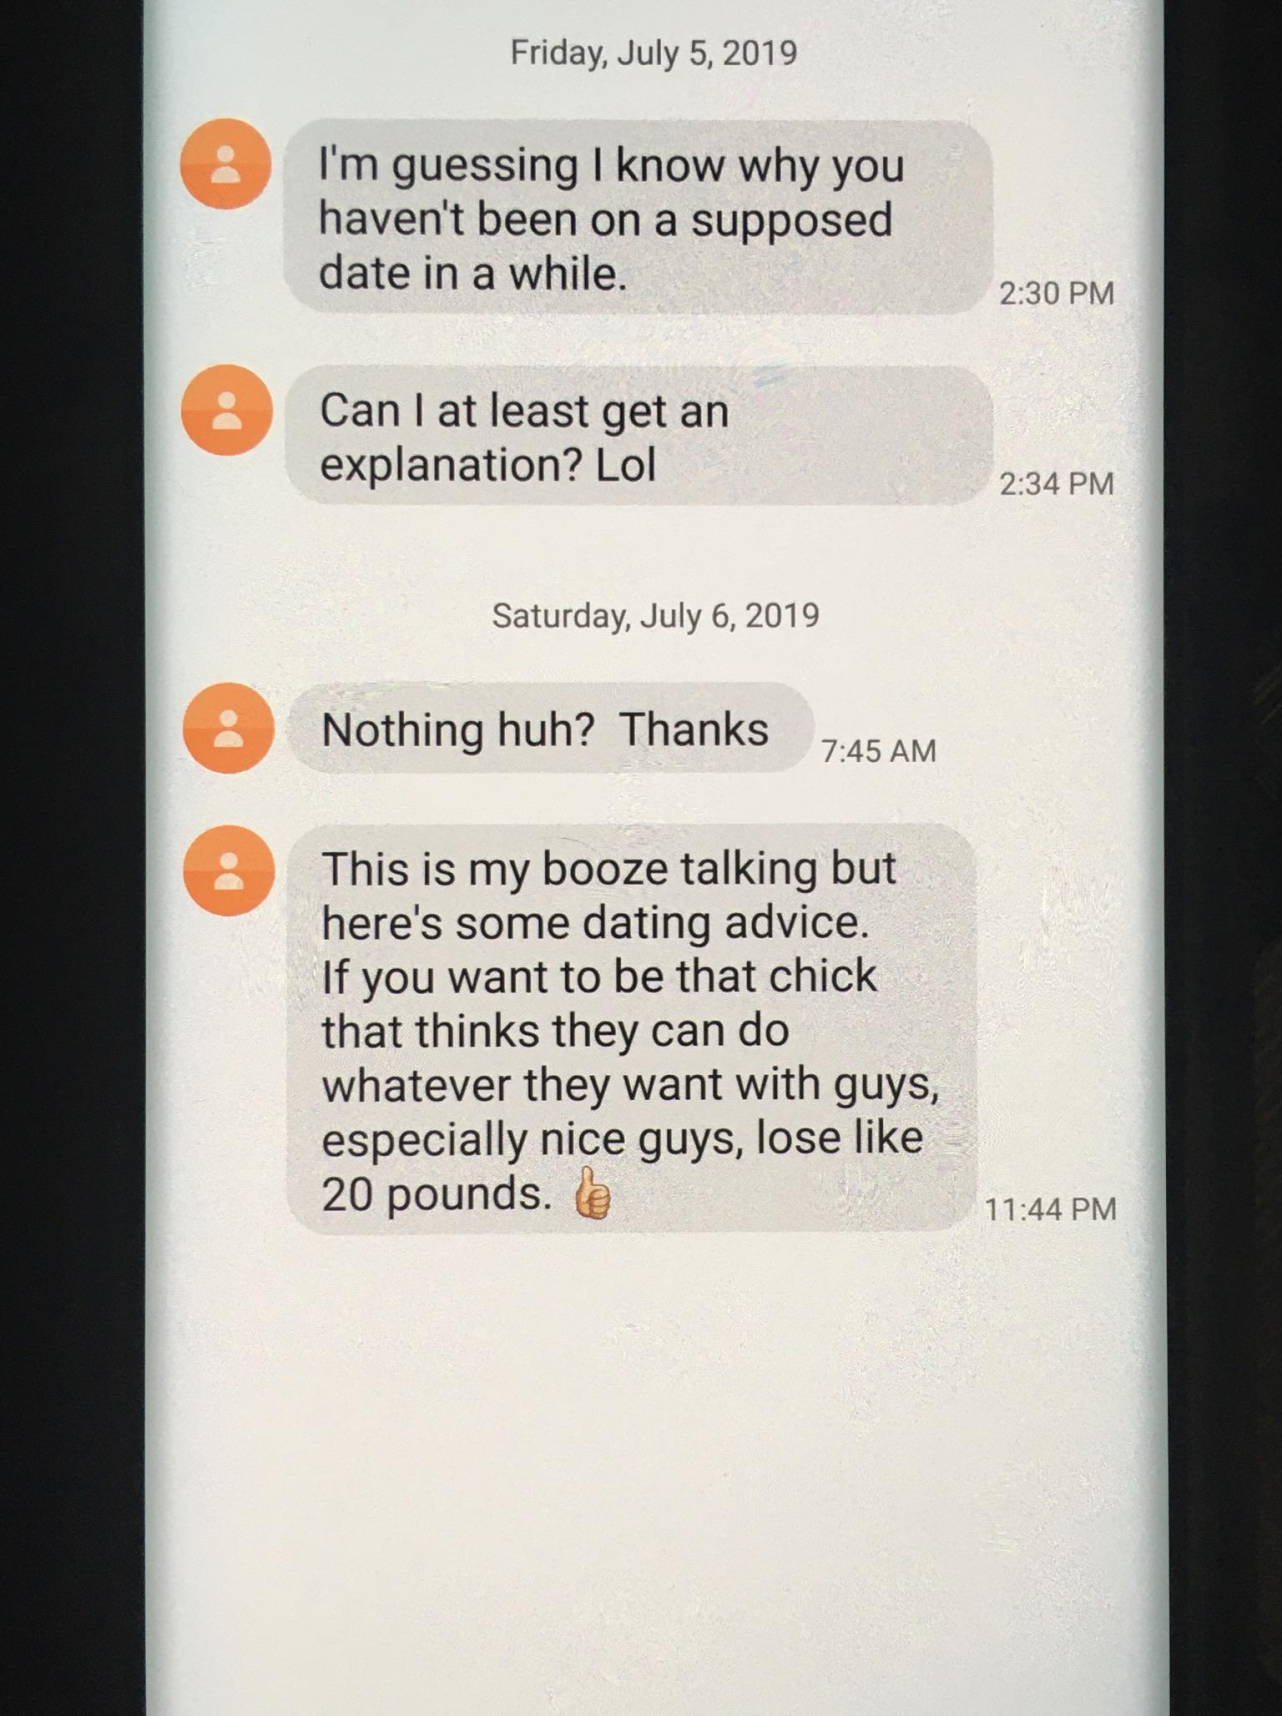 document - Friday, I'm guessing I know why you haven't been on a supposed date in a while. Can I at least get an explanation? Lol 2 34 Pm Saturday, Nothing huh? Thanks This is my booze talking but here's some dating advice. If you want to be that chick th